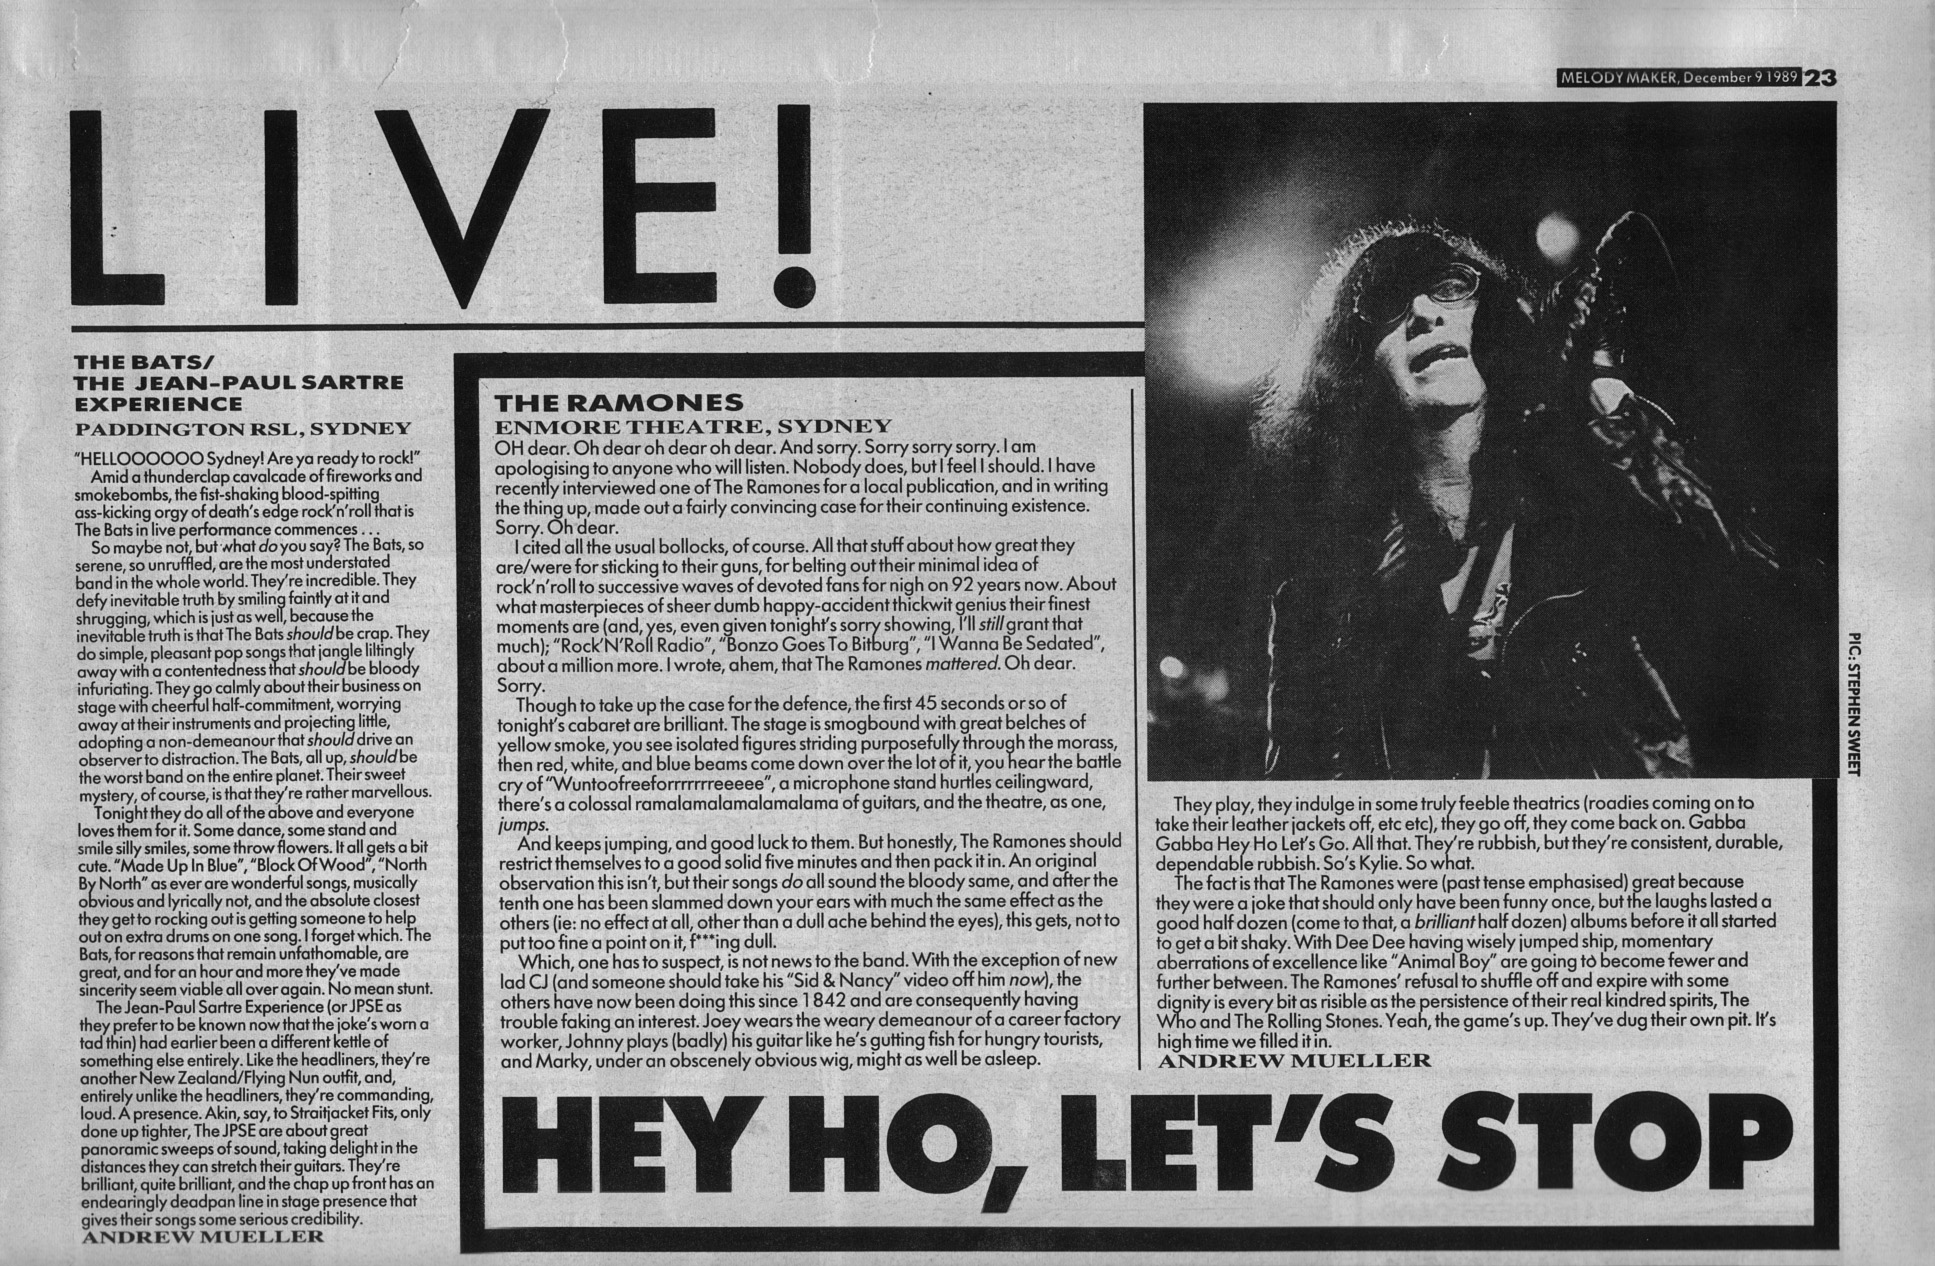 andrew-mueller-reviews-the-ramones-live-at-the-enmore-theatre-sydney-9th-december-1989.jpg